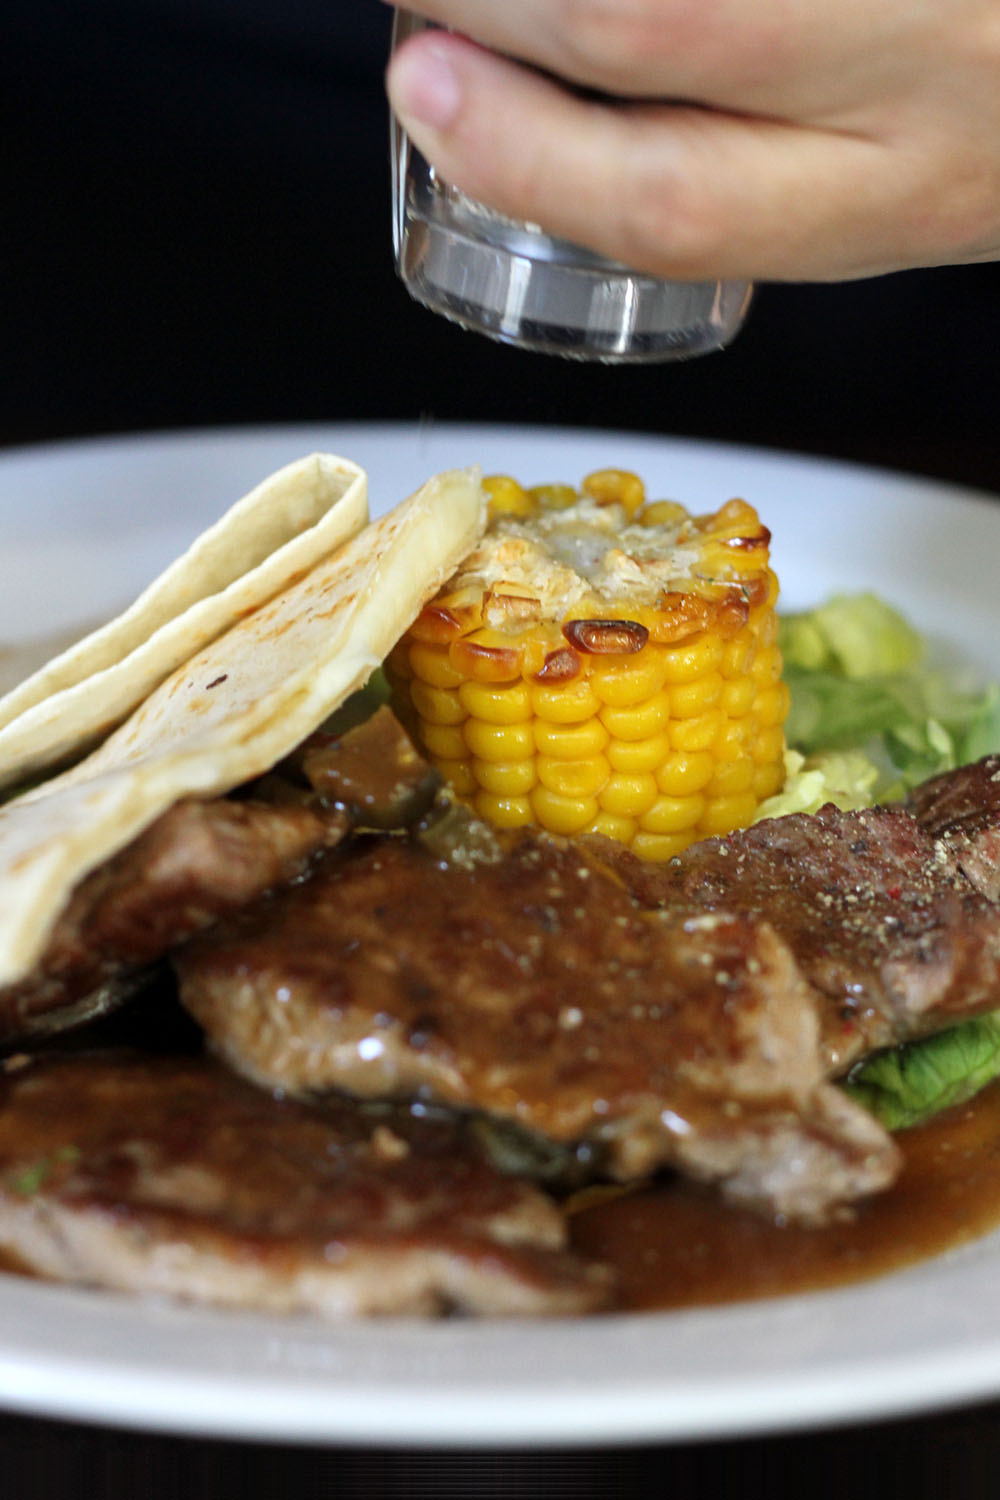 Medallions of pork with jalapenos, grilled corn and cheese quesadillas